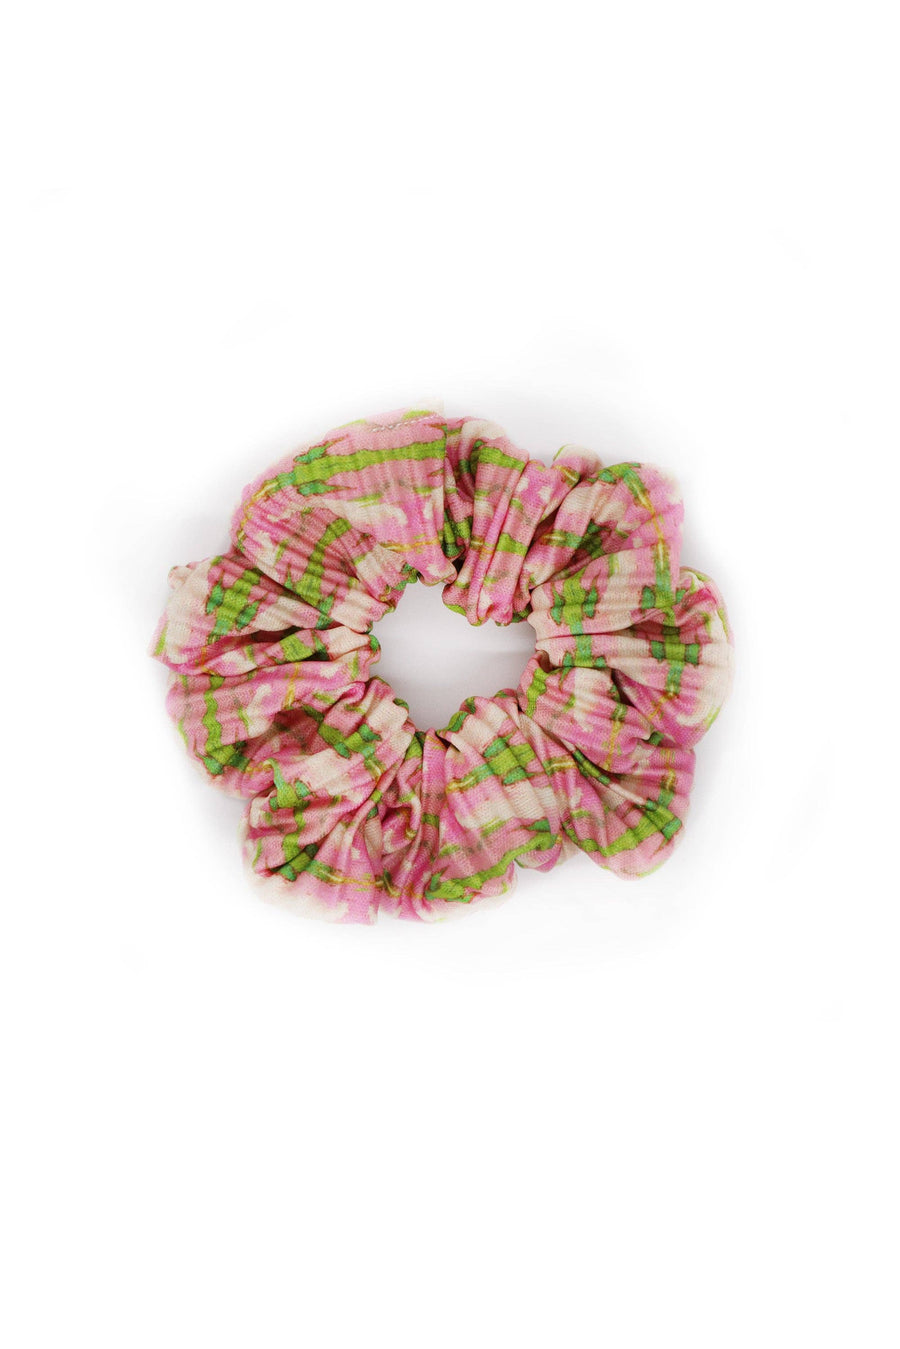 Pleated Scrunchie in Cabana Pink by Brooks Avenue